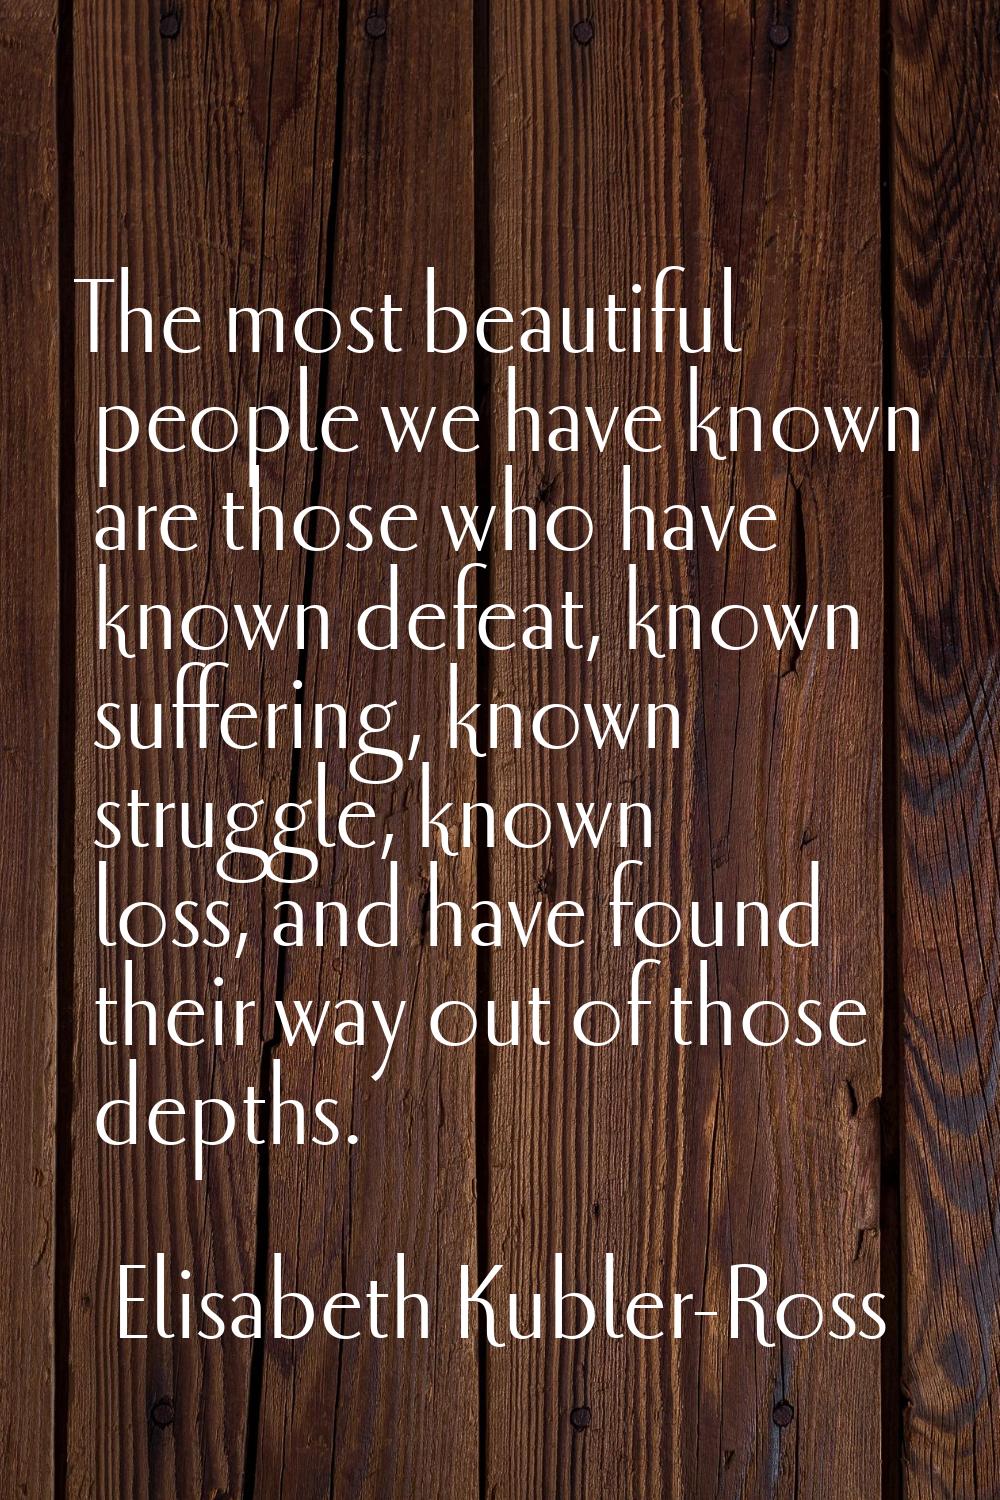 The most beautiful people we have known are those who have known defeat, known suffering, known str